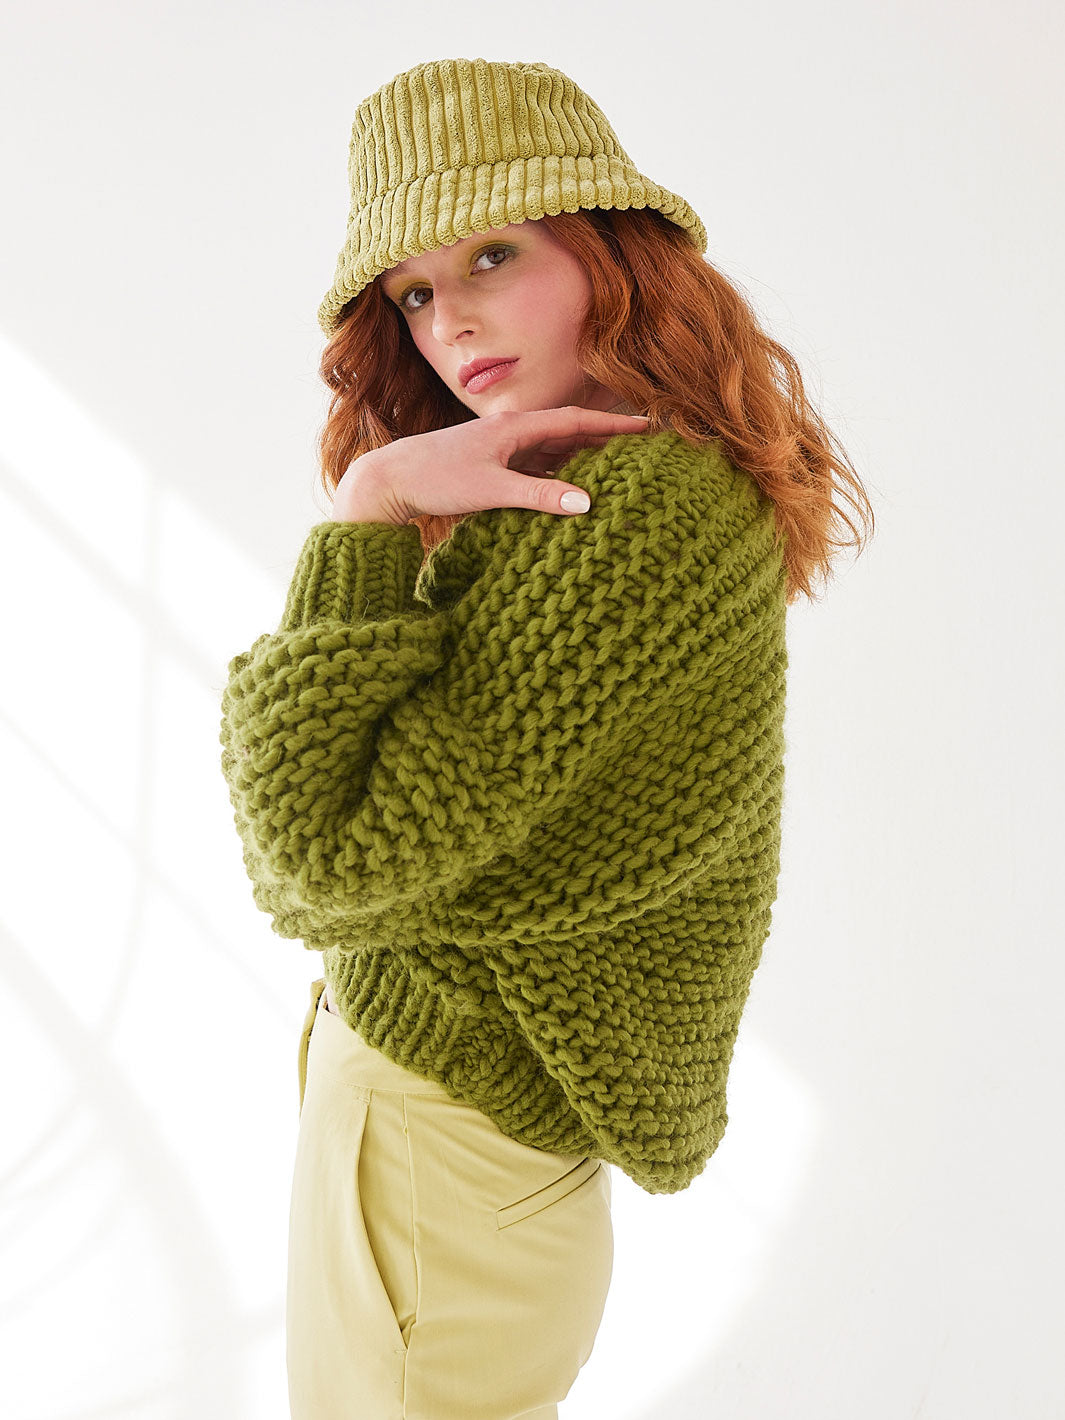 Girl in green hat wears a chunky knitted green cardigan